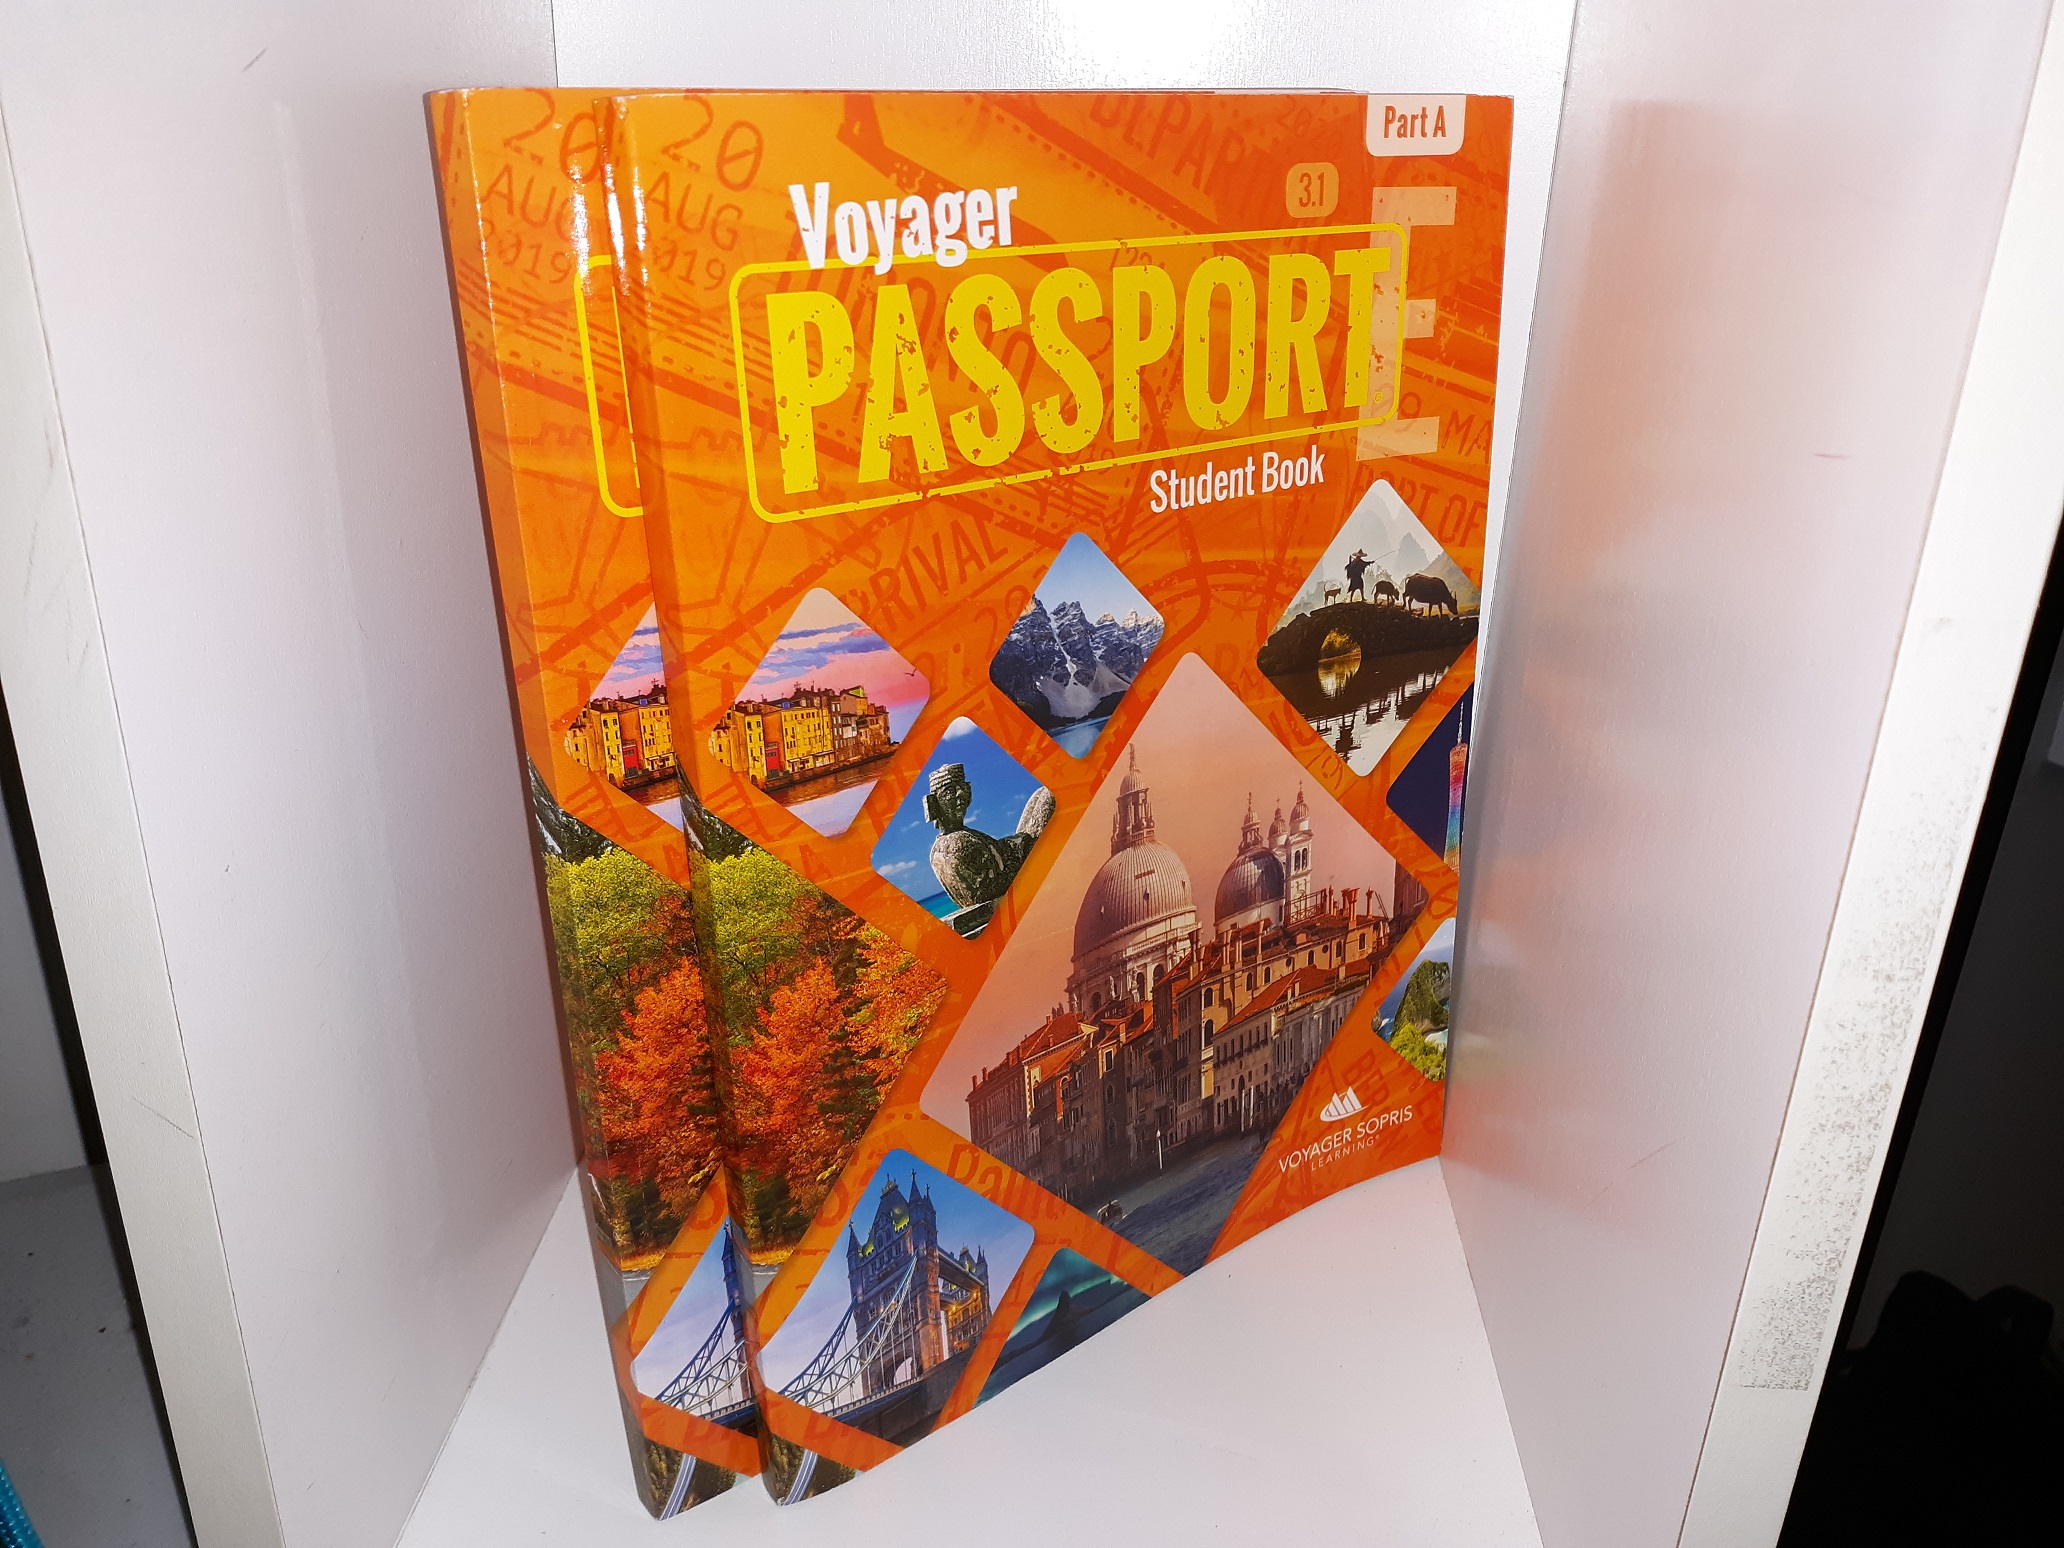 voyager-passport-student-book-2-vol-set-2022-published-by-voyager